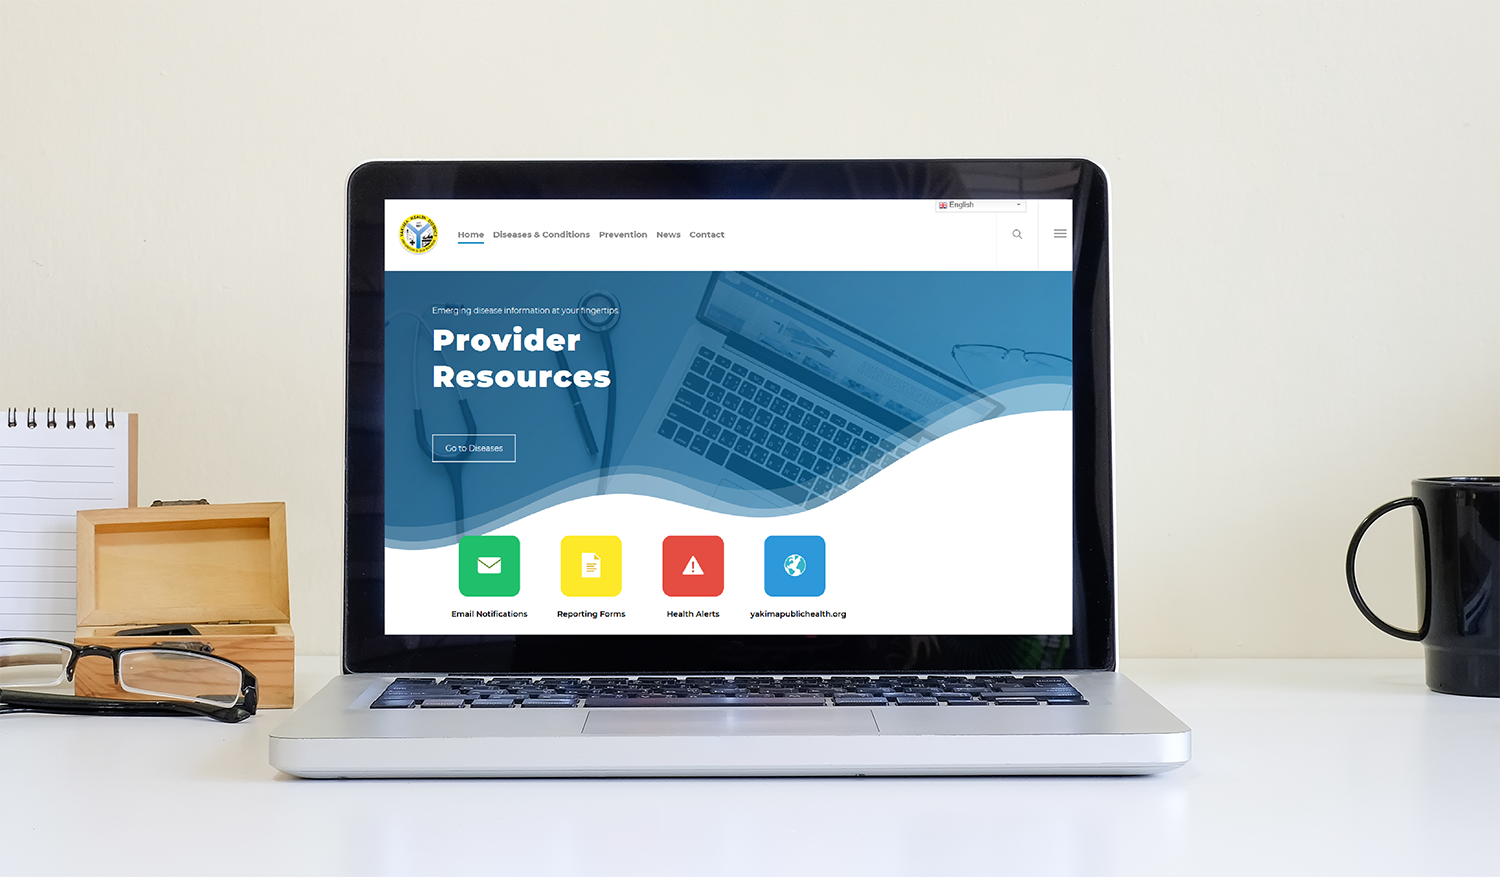 Laptop showing Provider Resources home page